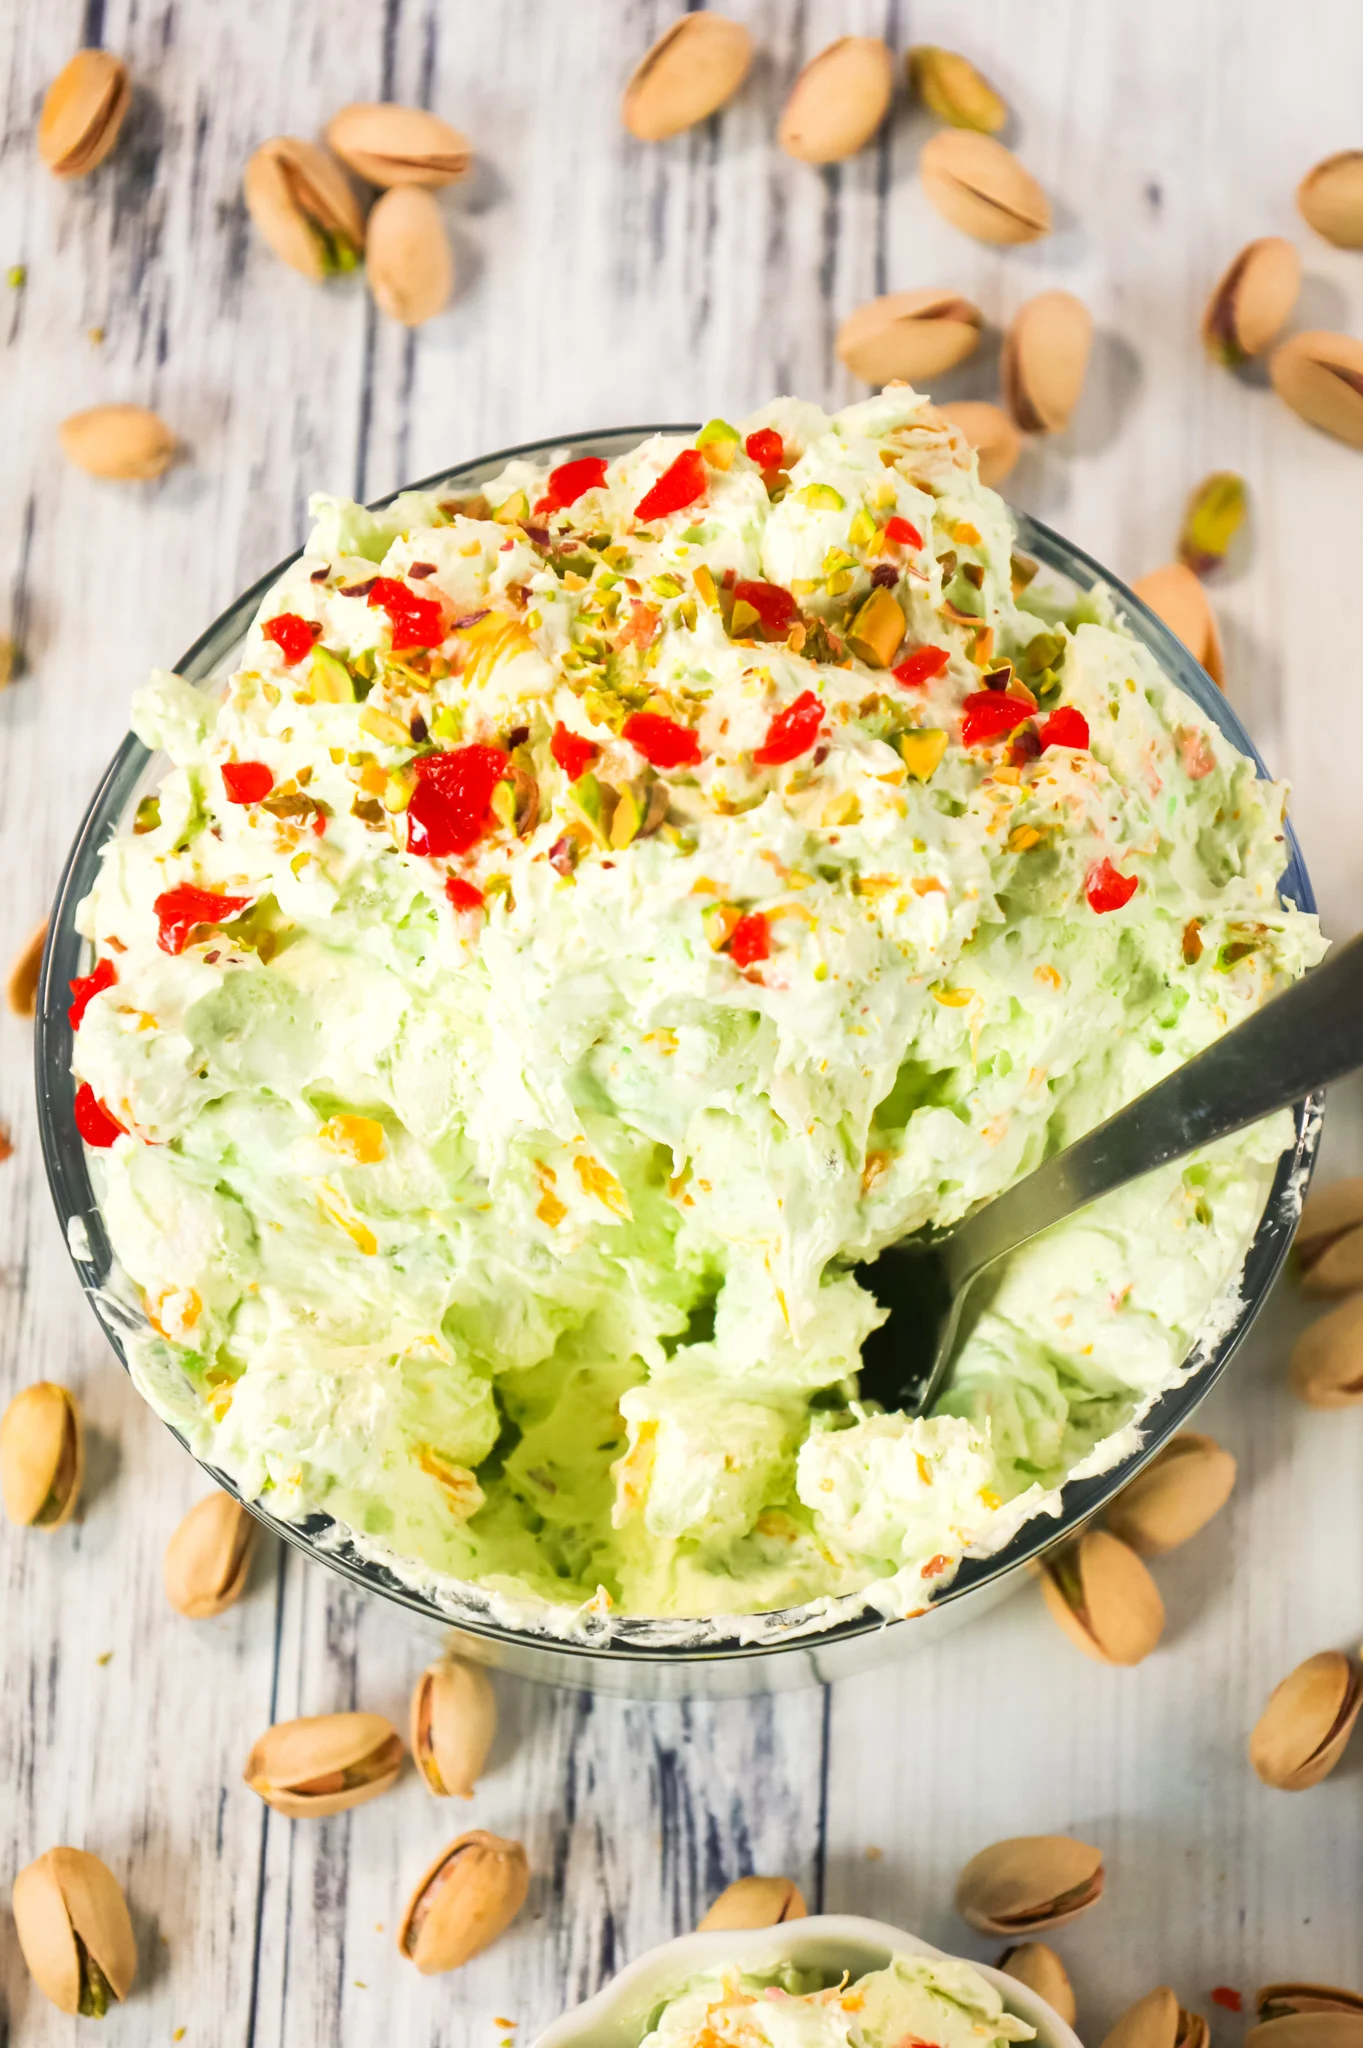 Pistachio Fluff Salad is a delicious side dish or dessert recipe loaded with crushed pineapple, mandarin segments, pistachio pudding mix, mini marshmallows and Cool Whip.